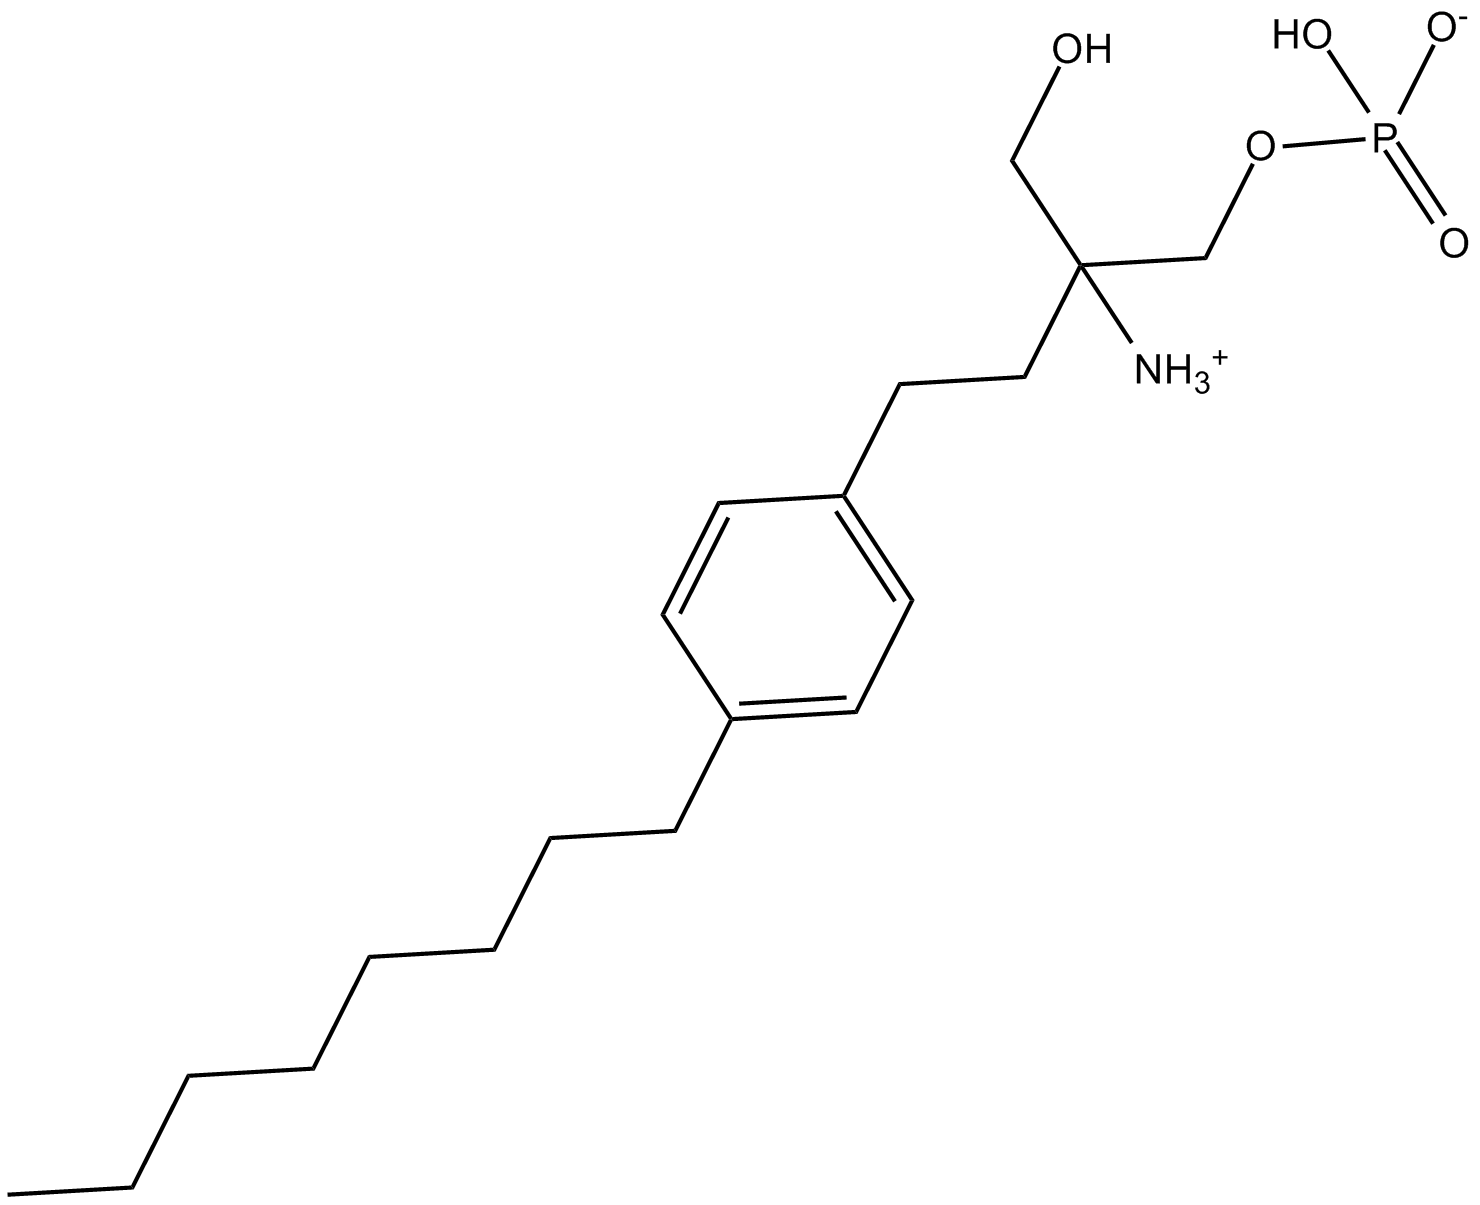 FTY720 Phosphate Chemical Structure